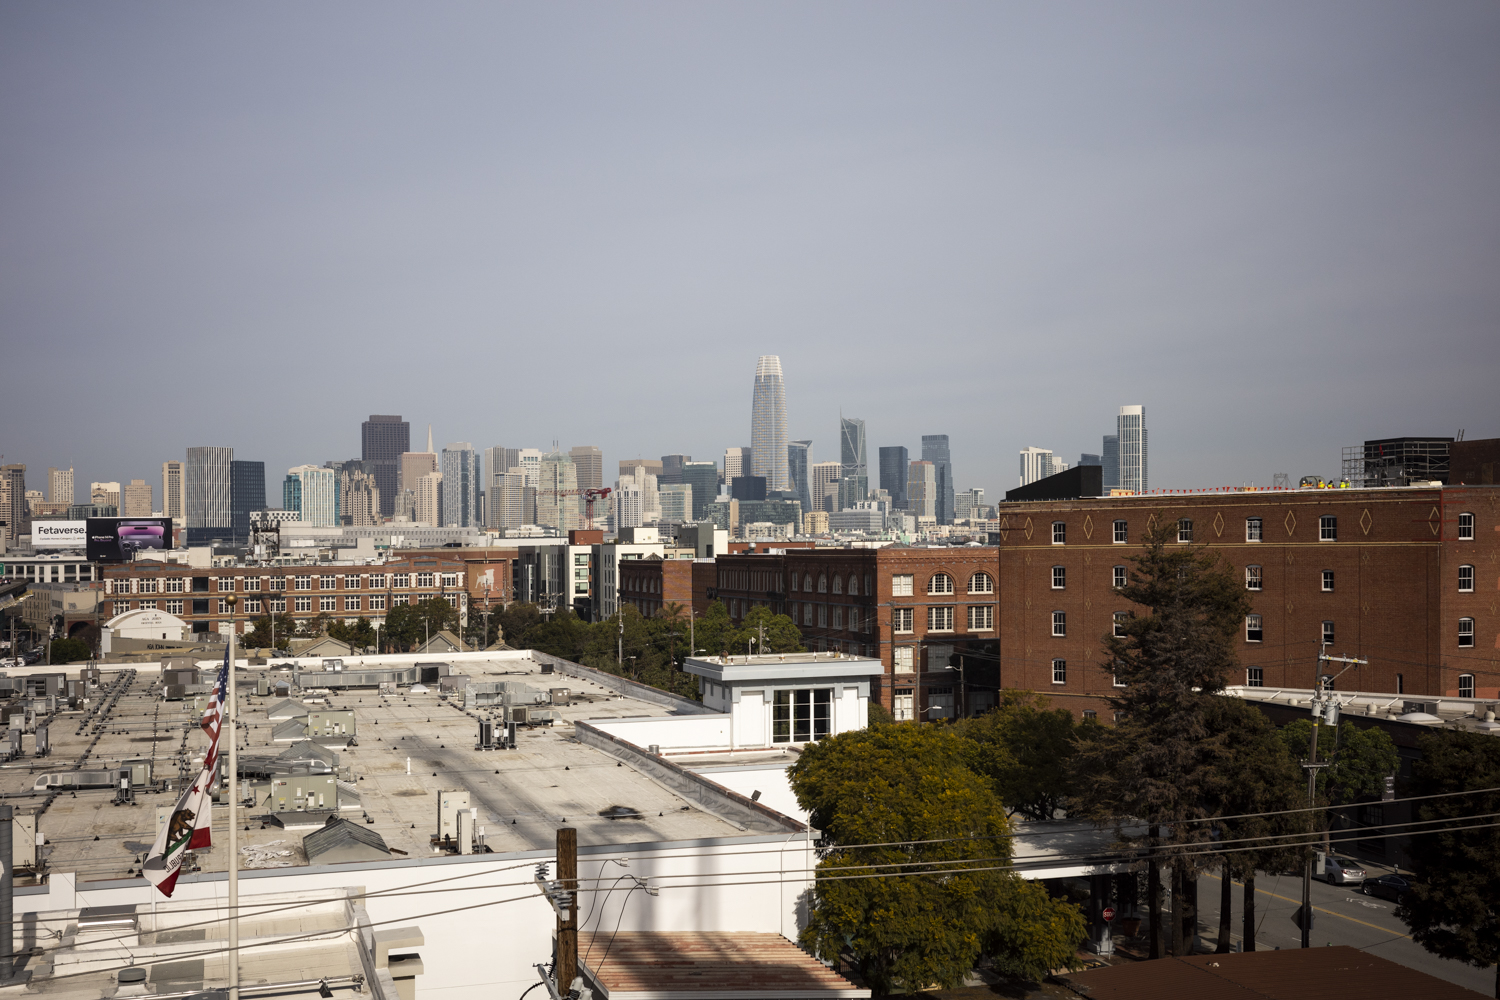 San Francisco skyline view from 300 Kansas Street, image by author